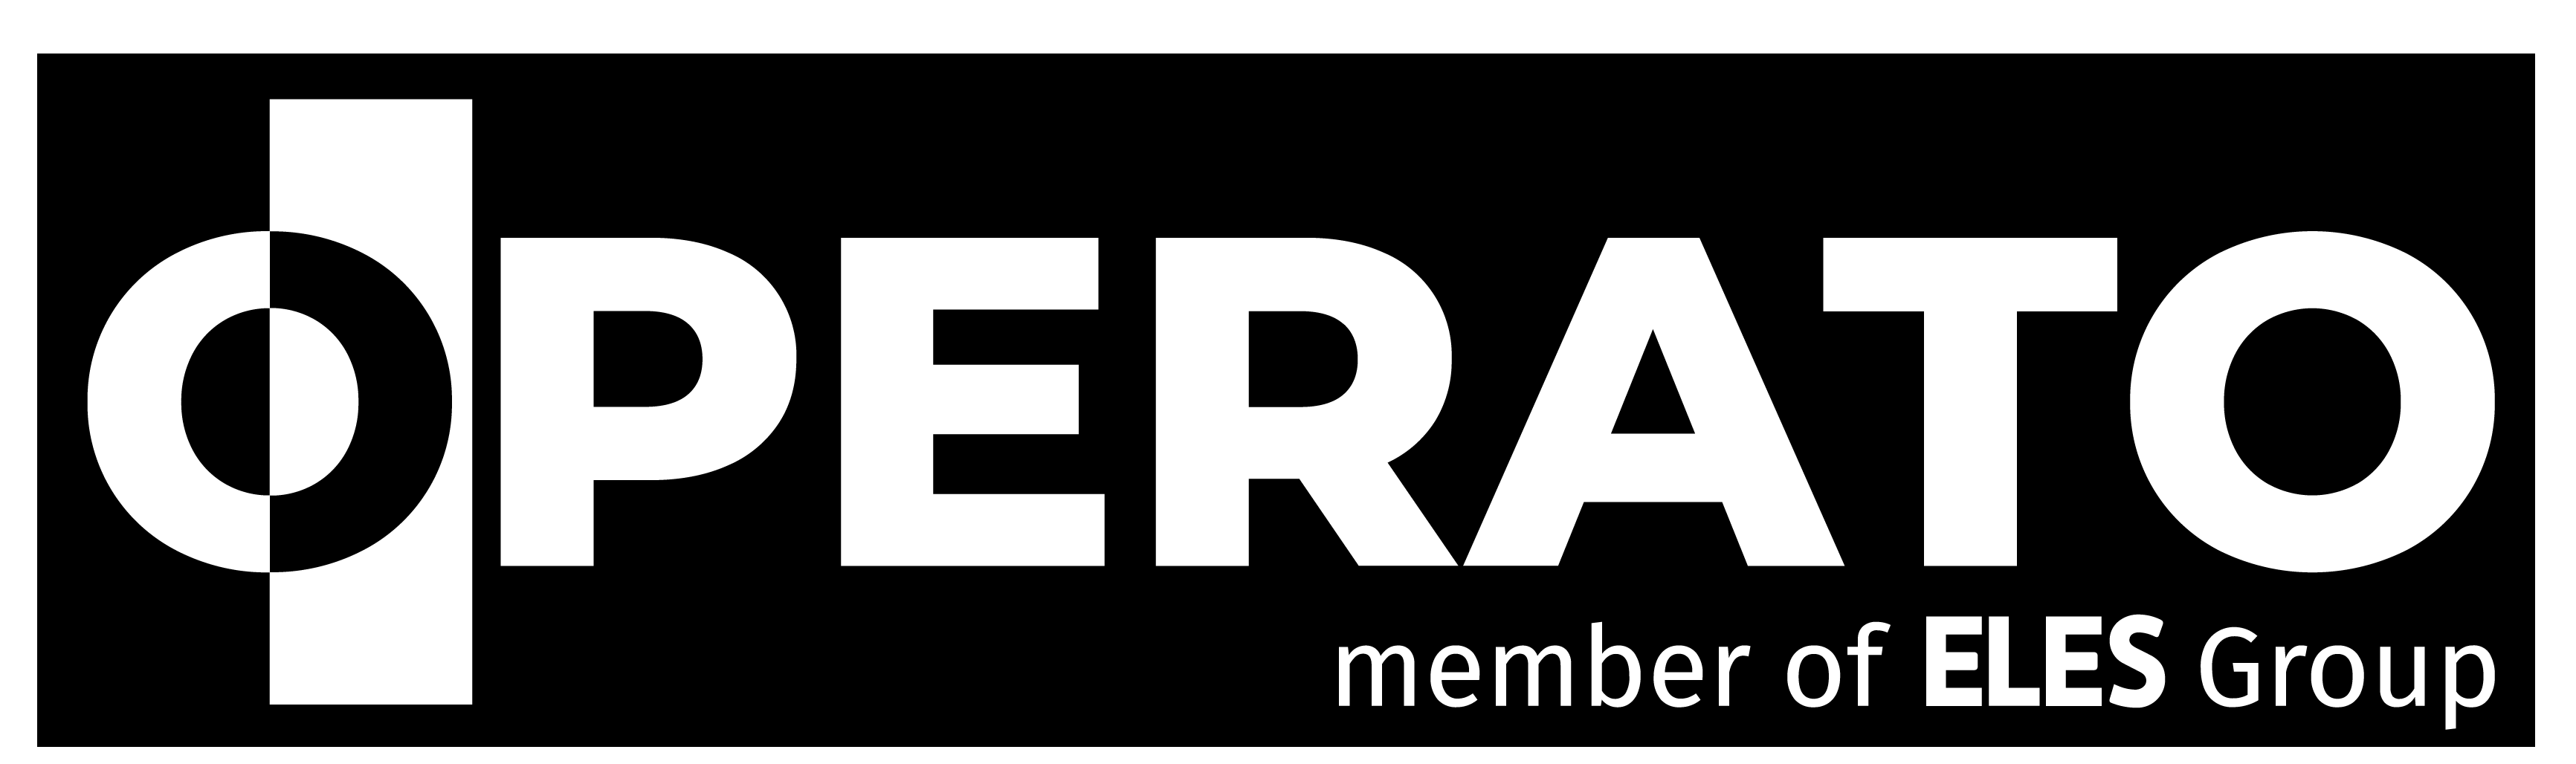 DiTeR is marketed by Operato since 2020.